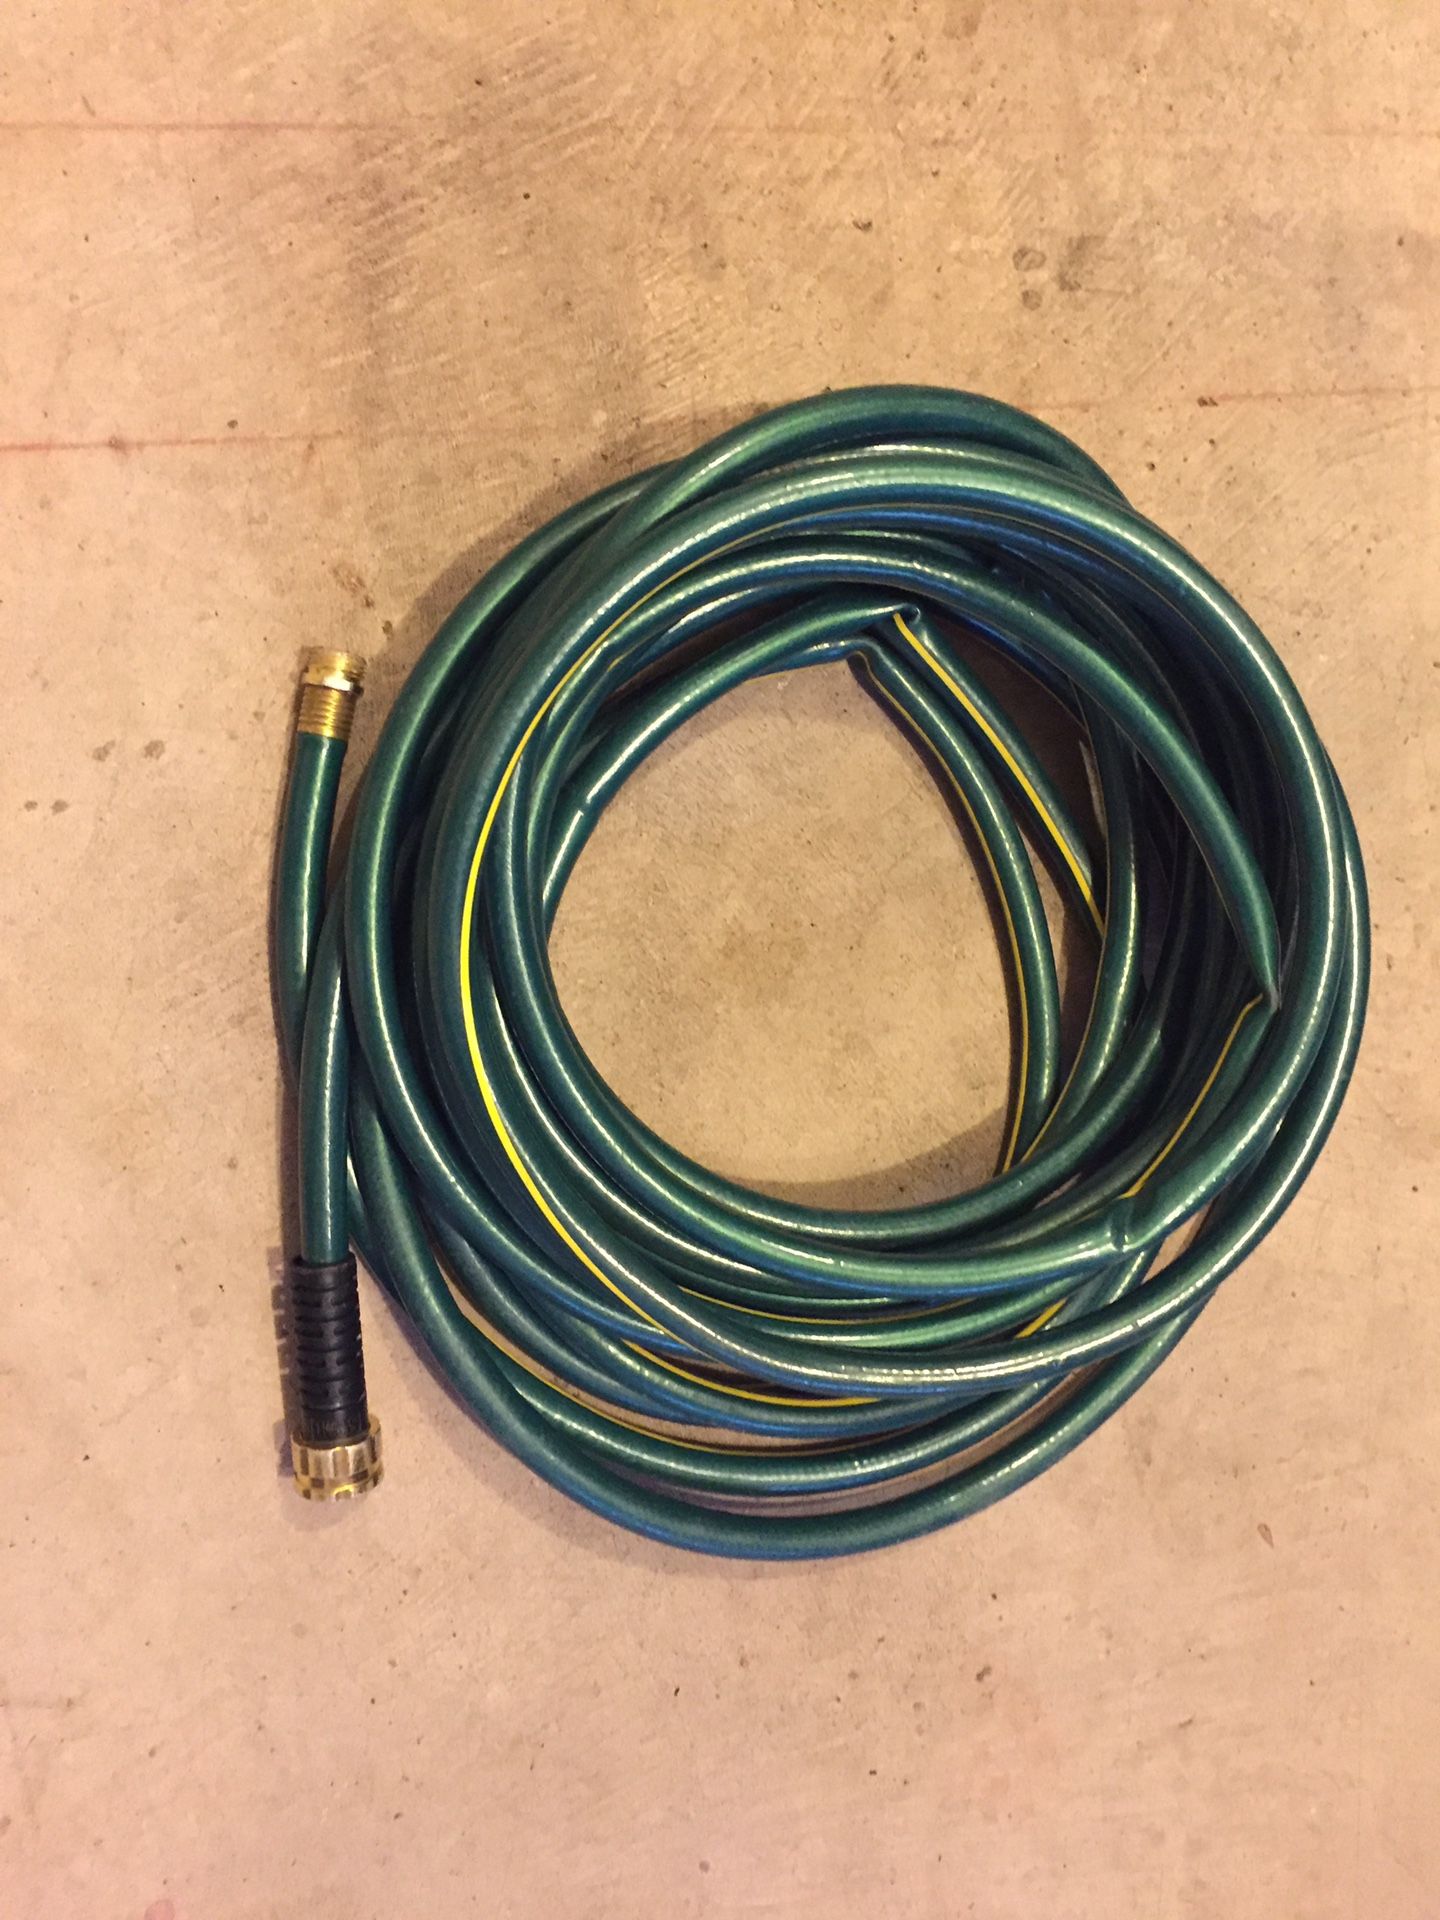 Green Garden Hose 25ft Used Couple Times 